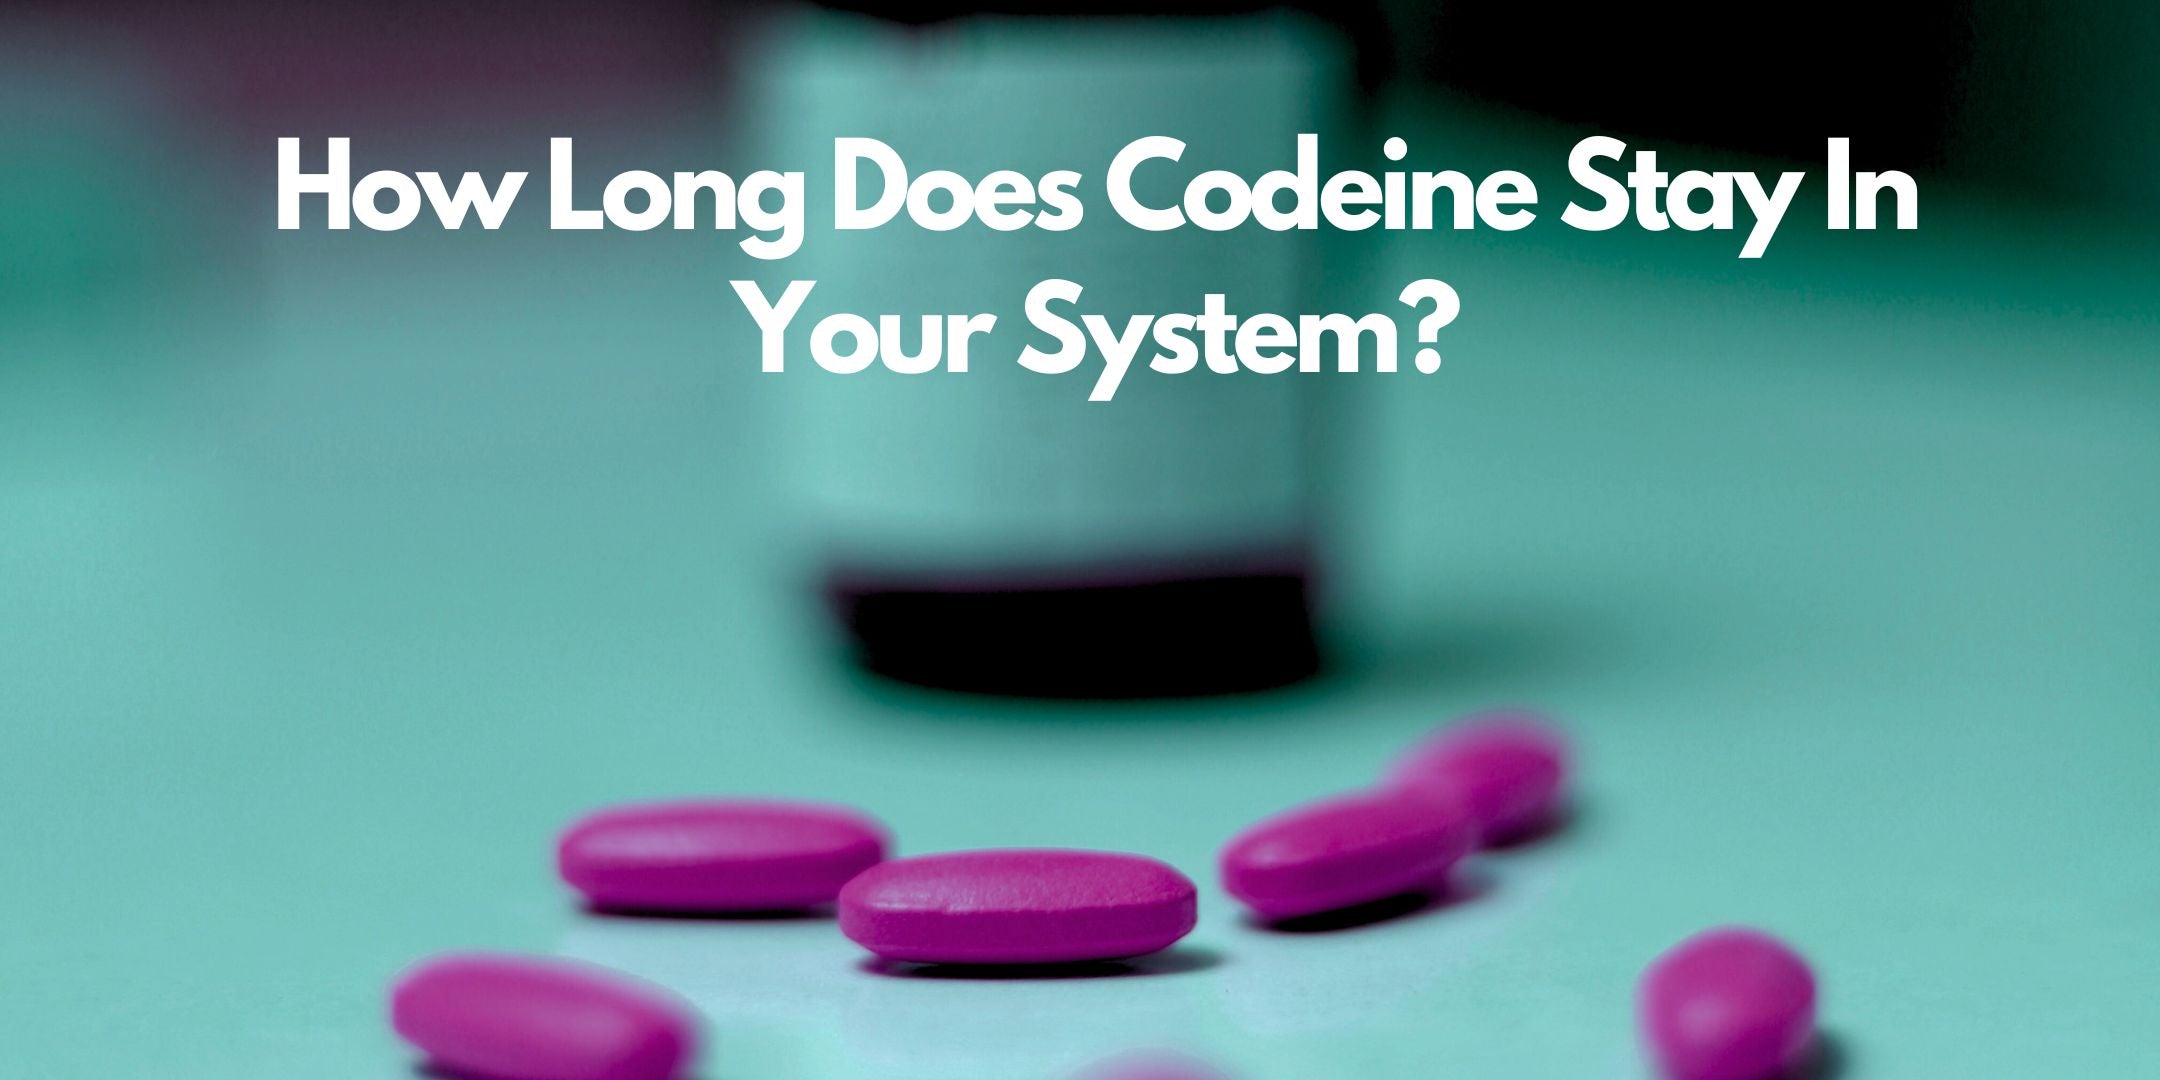 Codeine Abuse: How Long Does Codeine Stay In Your System?